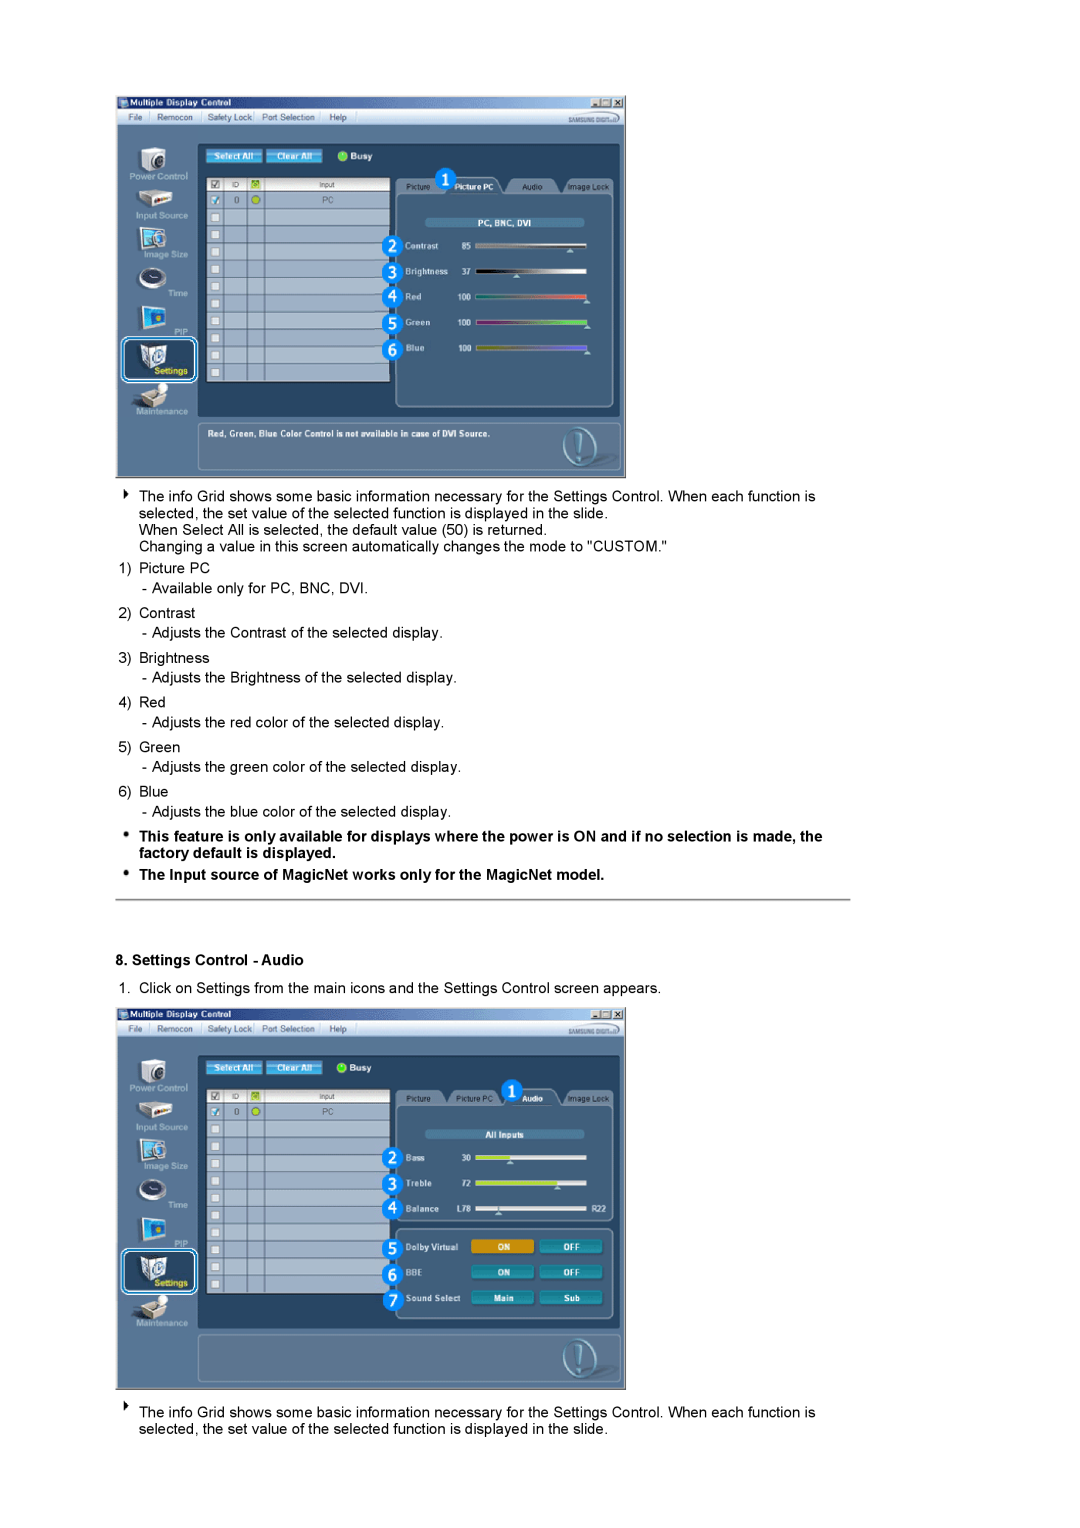 Samsung 320P manual The Input source of MagicNet works only for the MagicNet model, Settings Control - Audio 